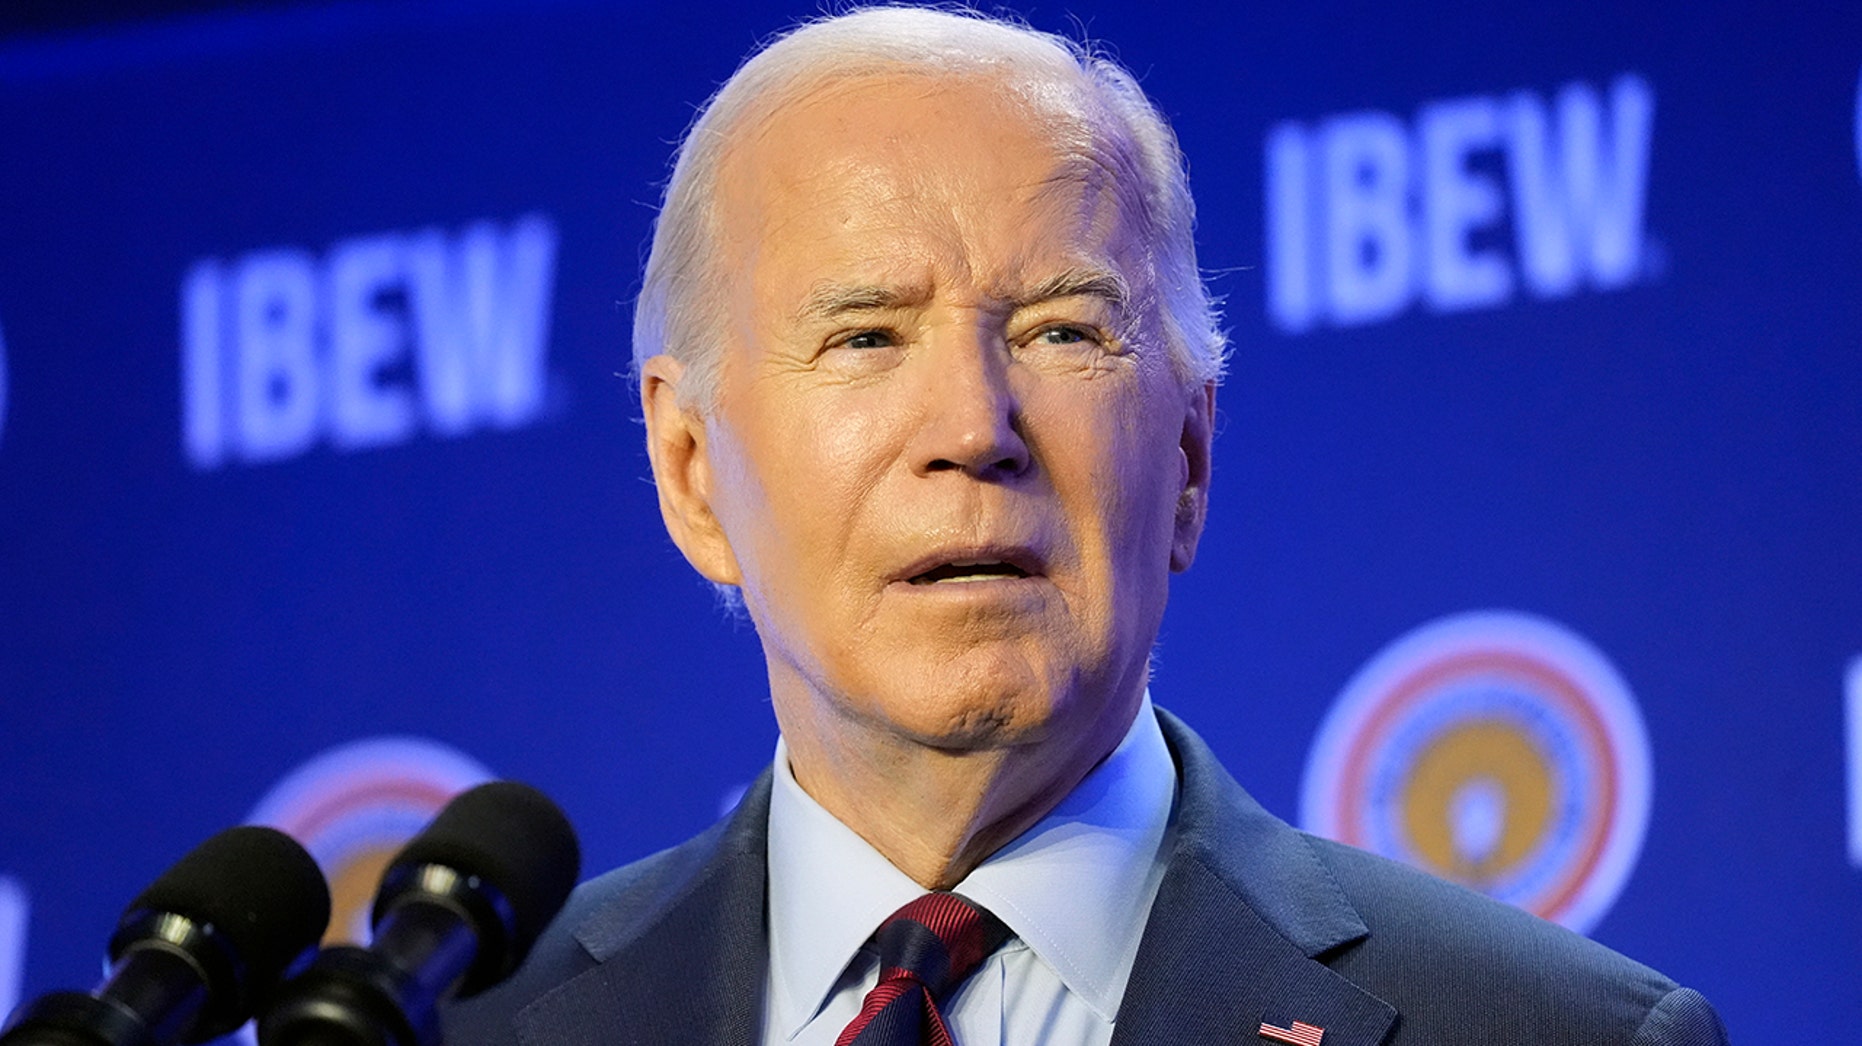 Biden calls Japan 'xenophobic' for not accepting many immigrants, compares to China, Russia